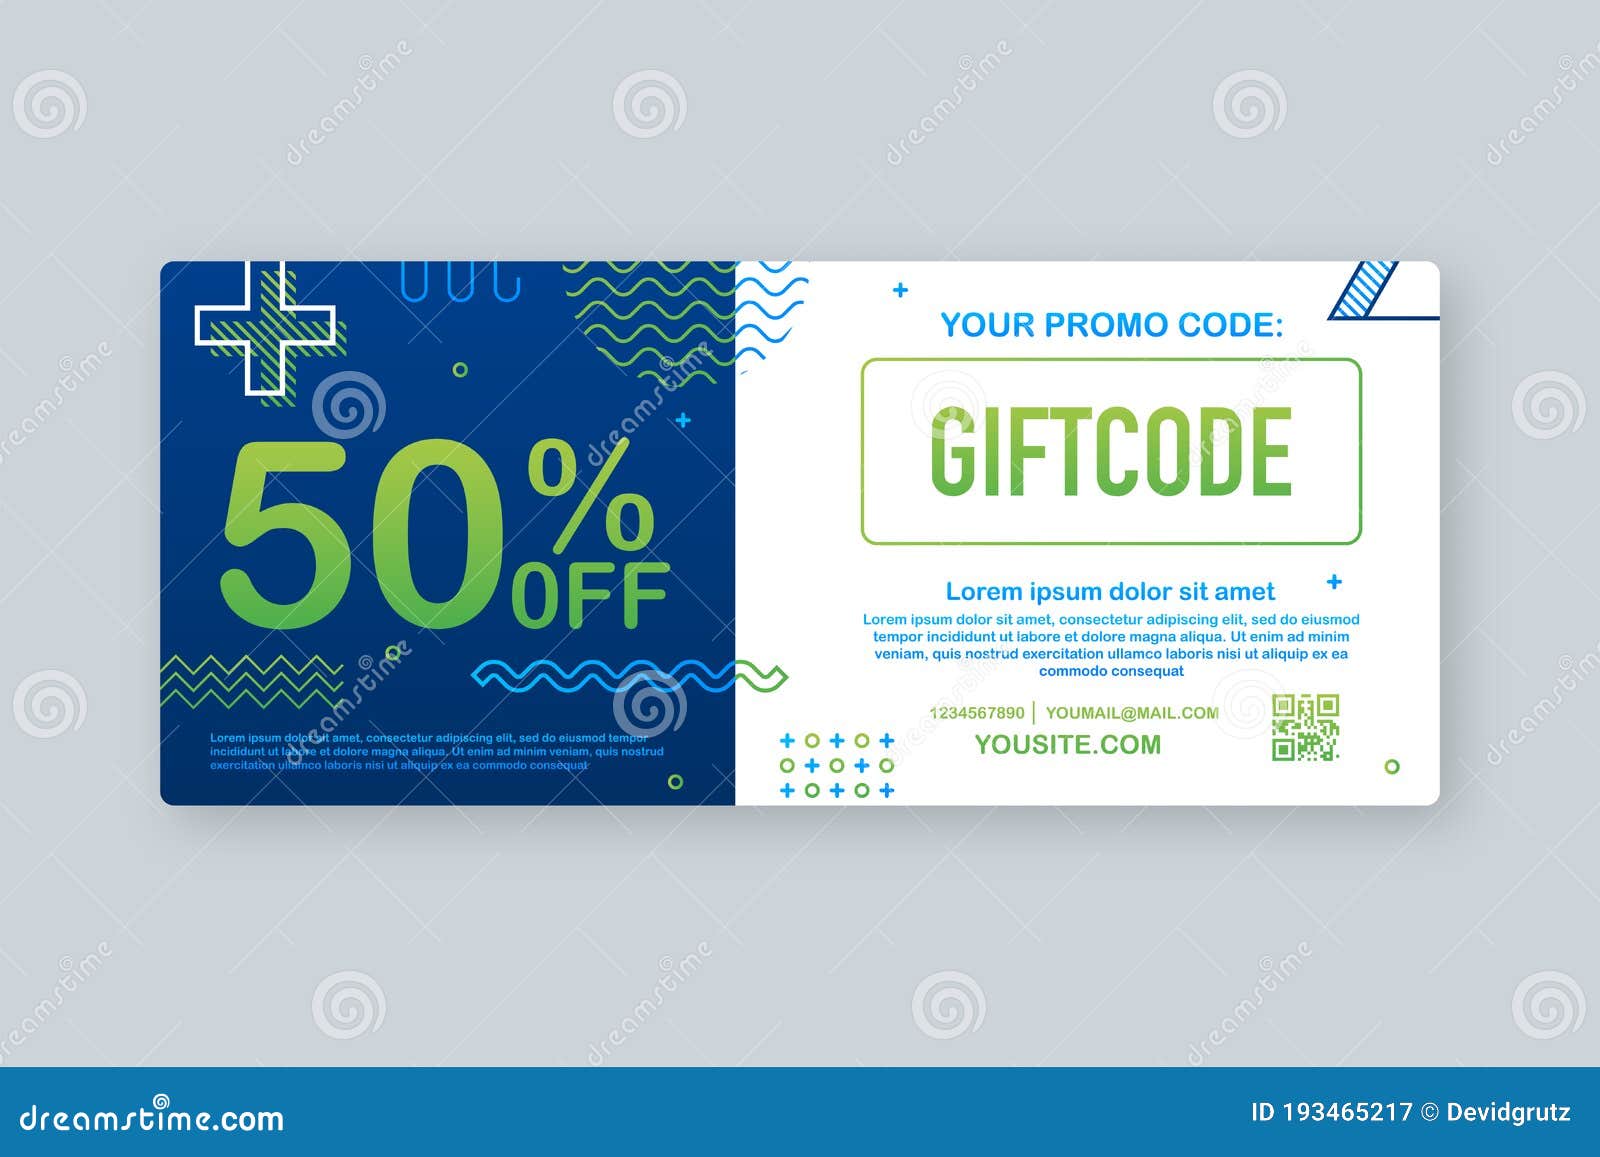 The Most Effective Ways To Use Promo Codes